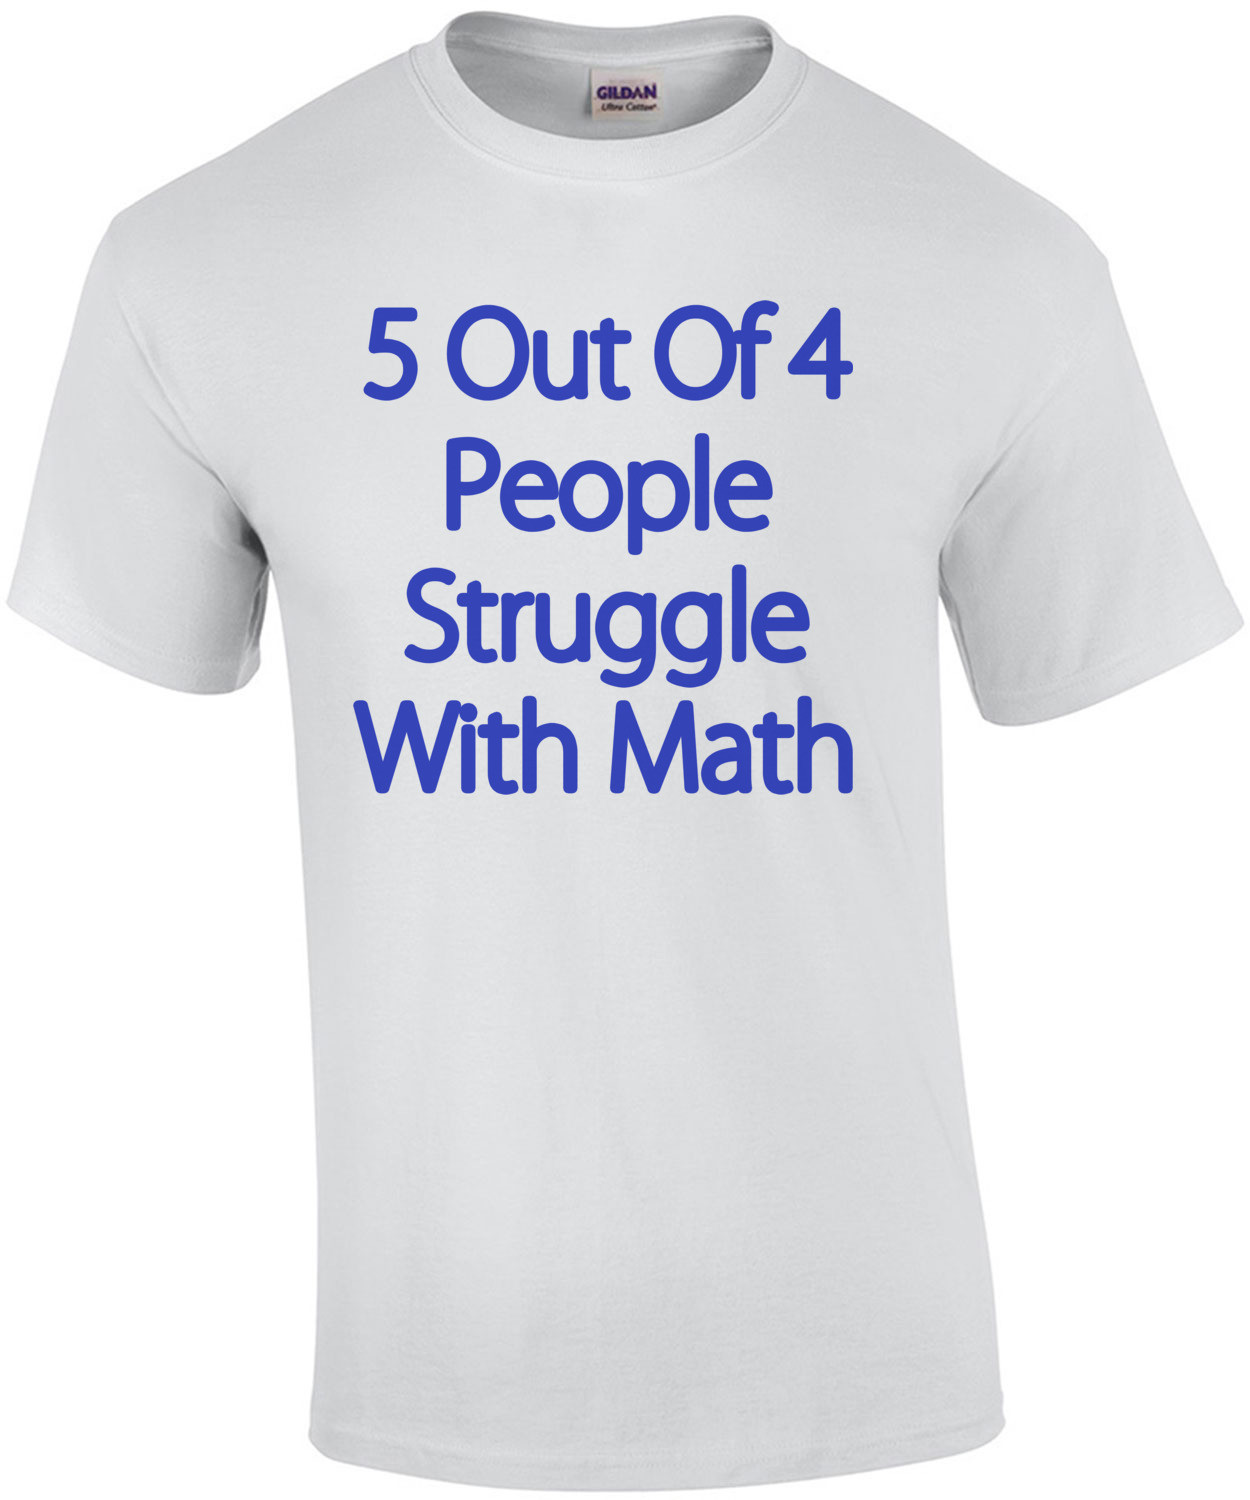 5 Out Of 4 People Struggle With Math Funny